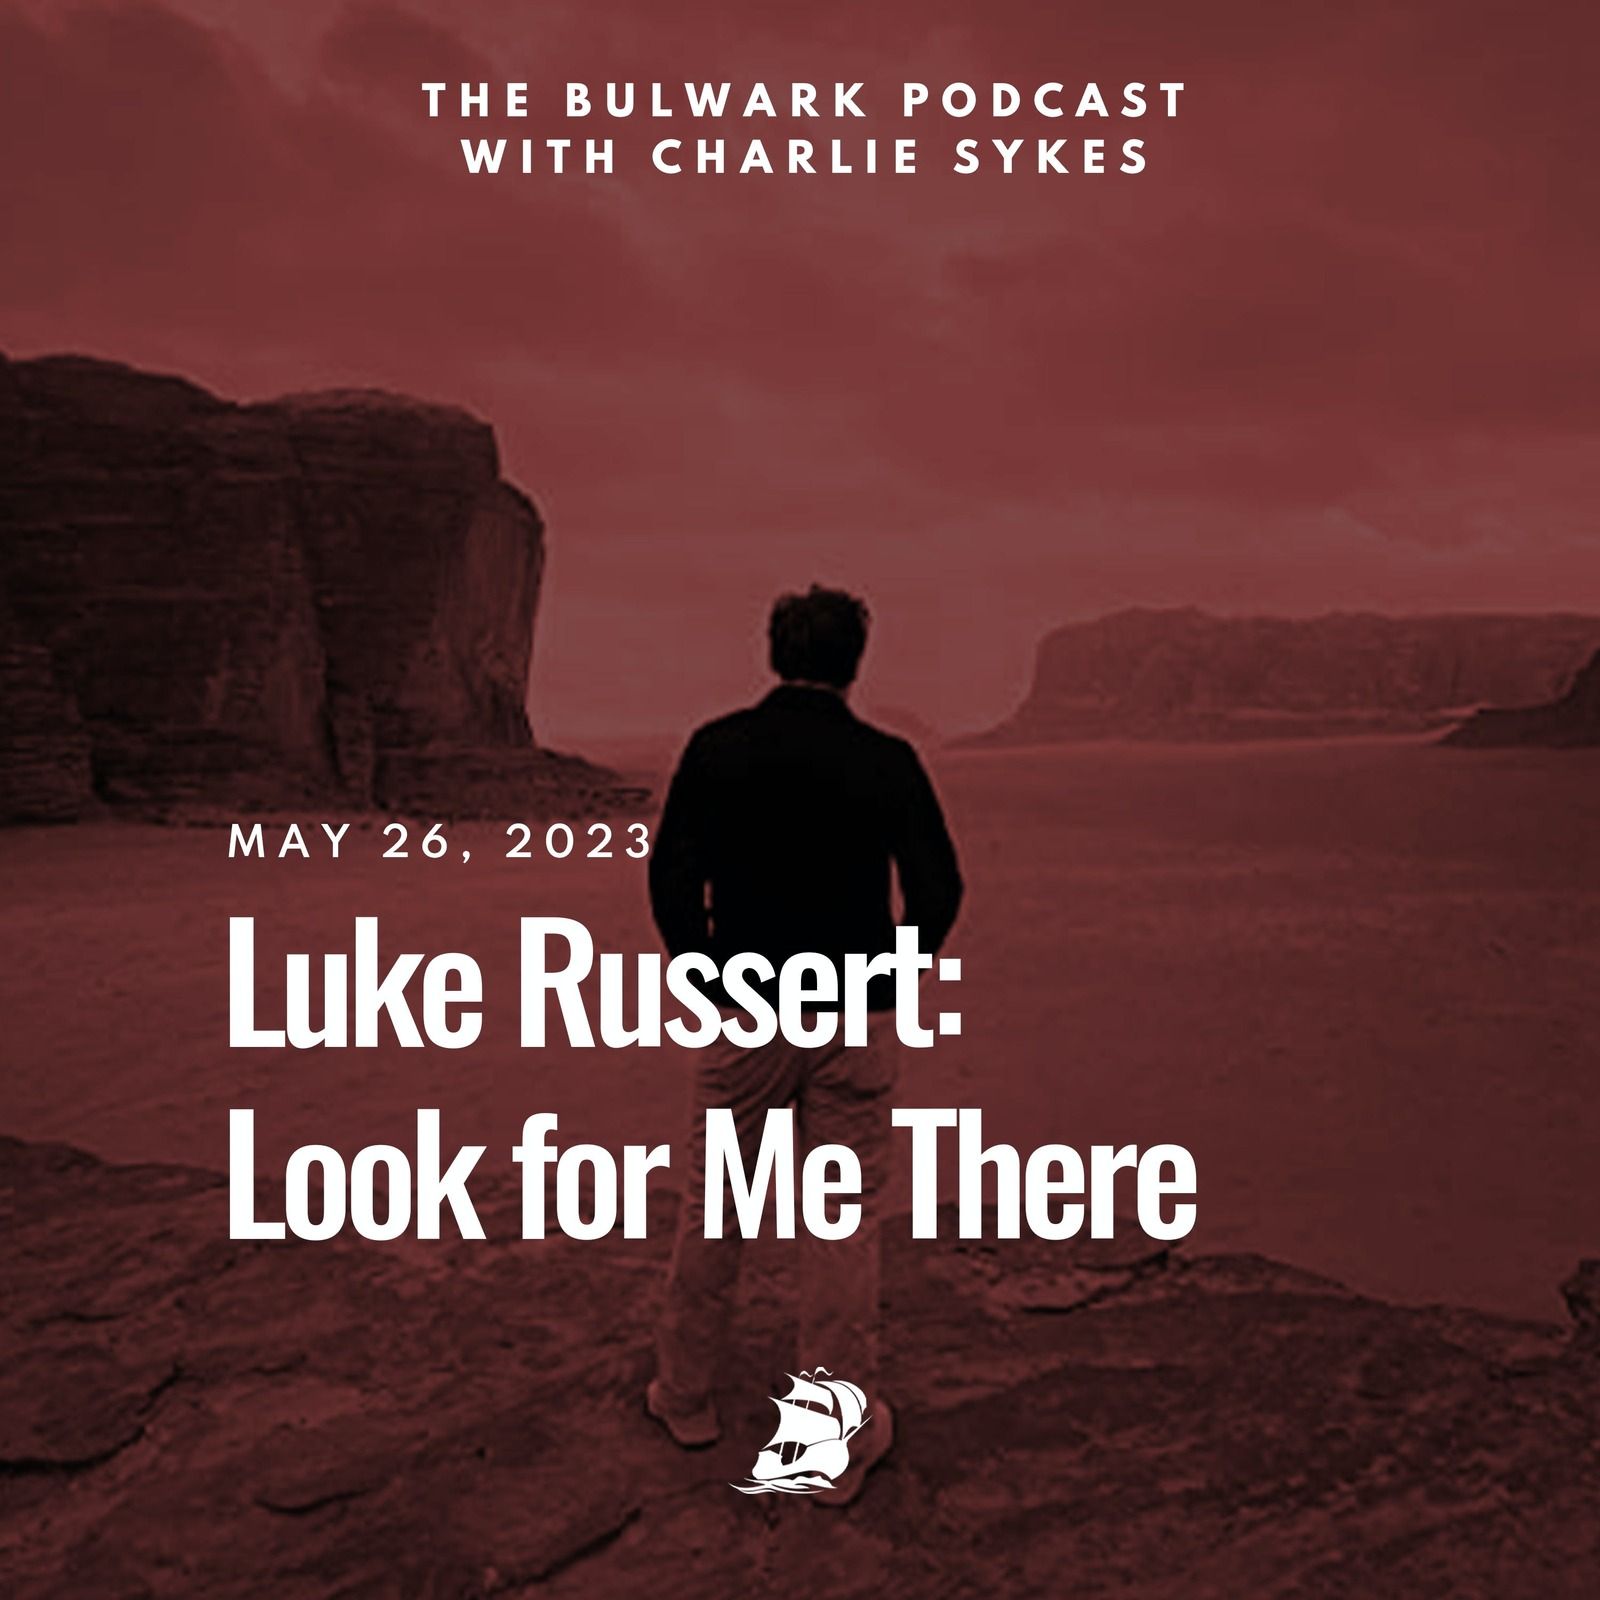 Luke Russert: Look for Me There by The Bulwark Podcast